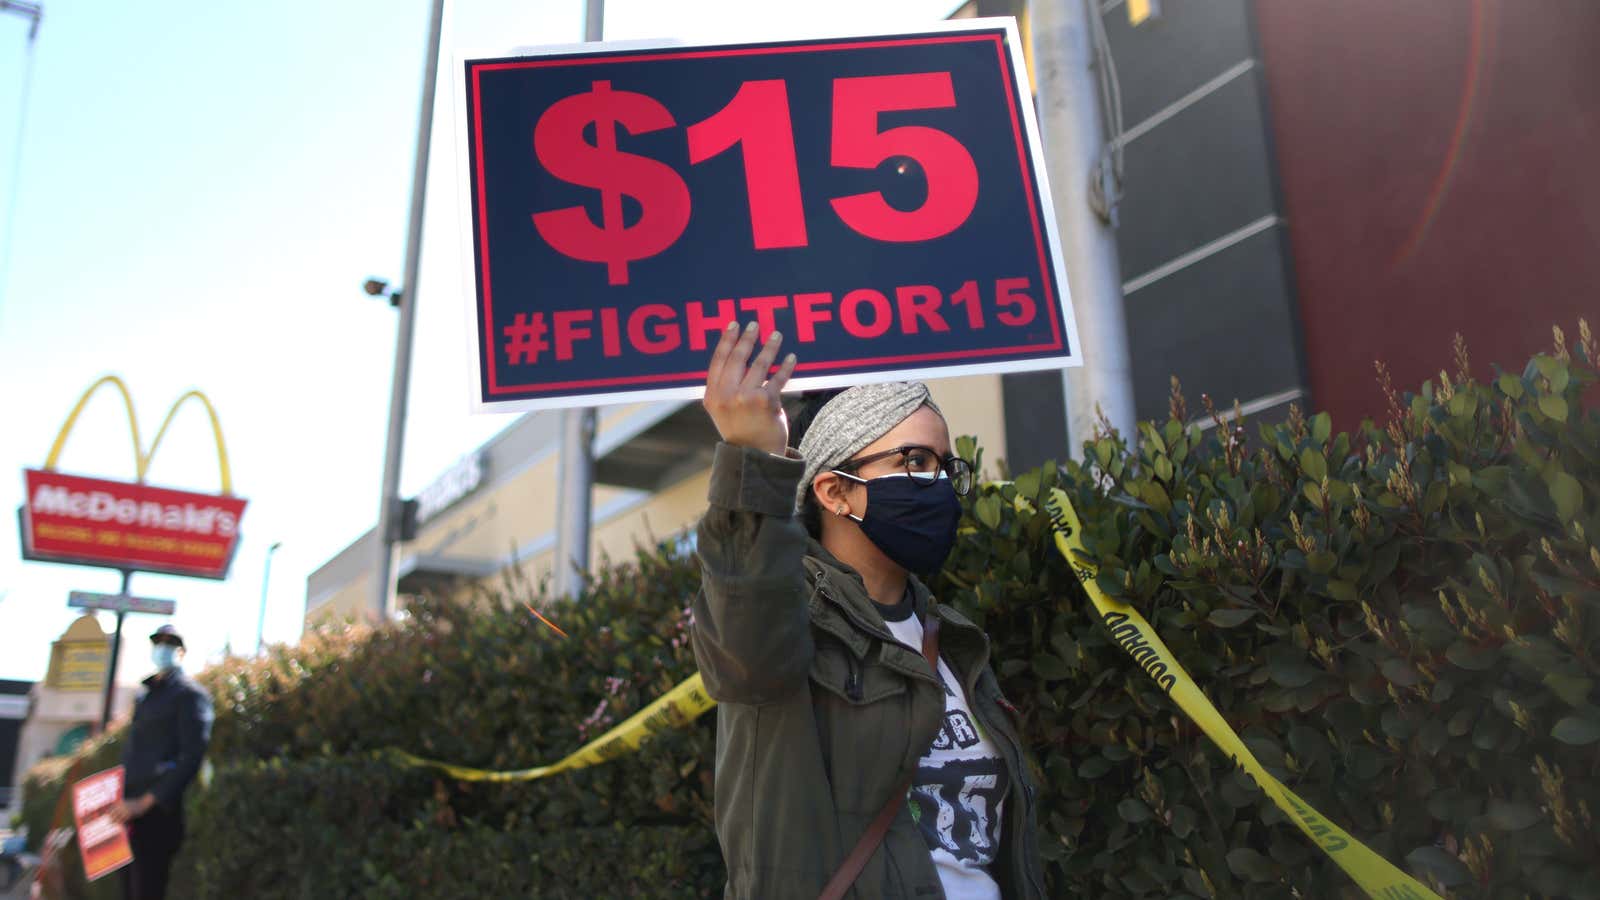 Fast food wages are way past the “Fight for $15”